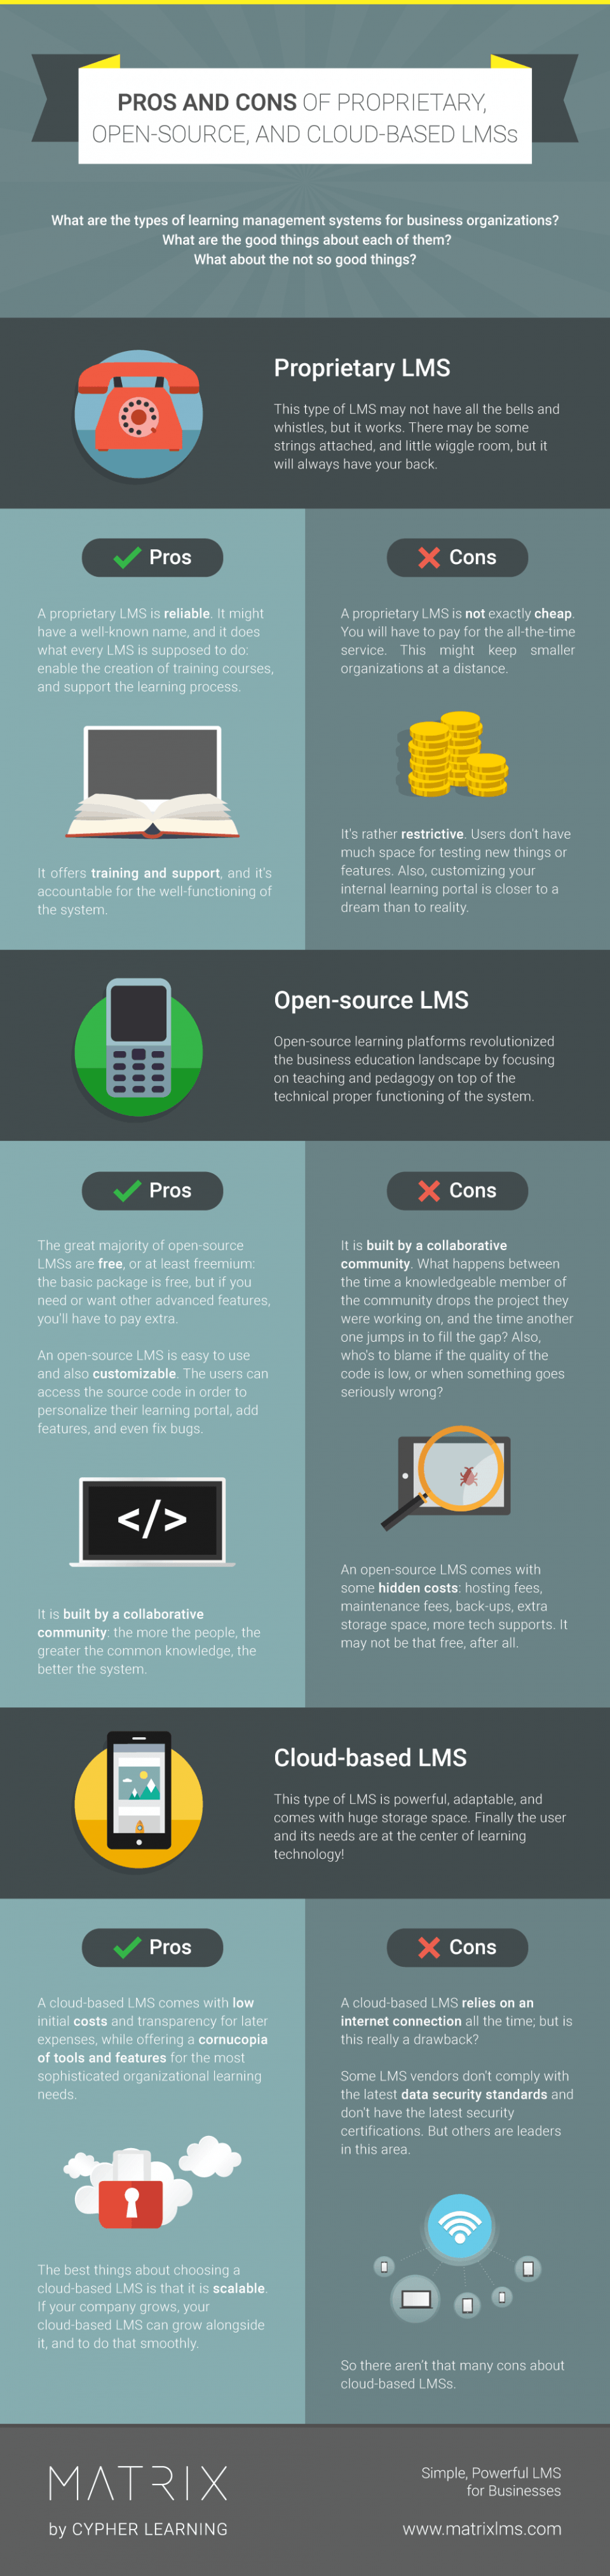 Pros and Cons of Proprietary, Open-Source, and Cloud-Based LMSs Infographic